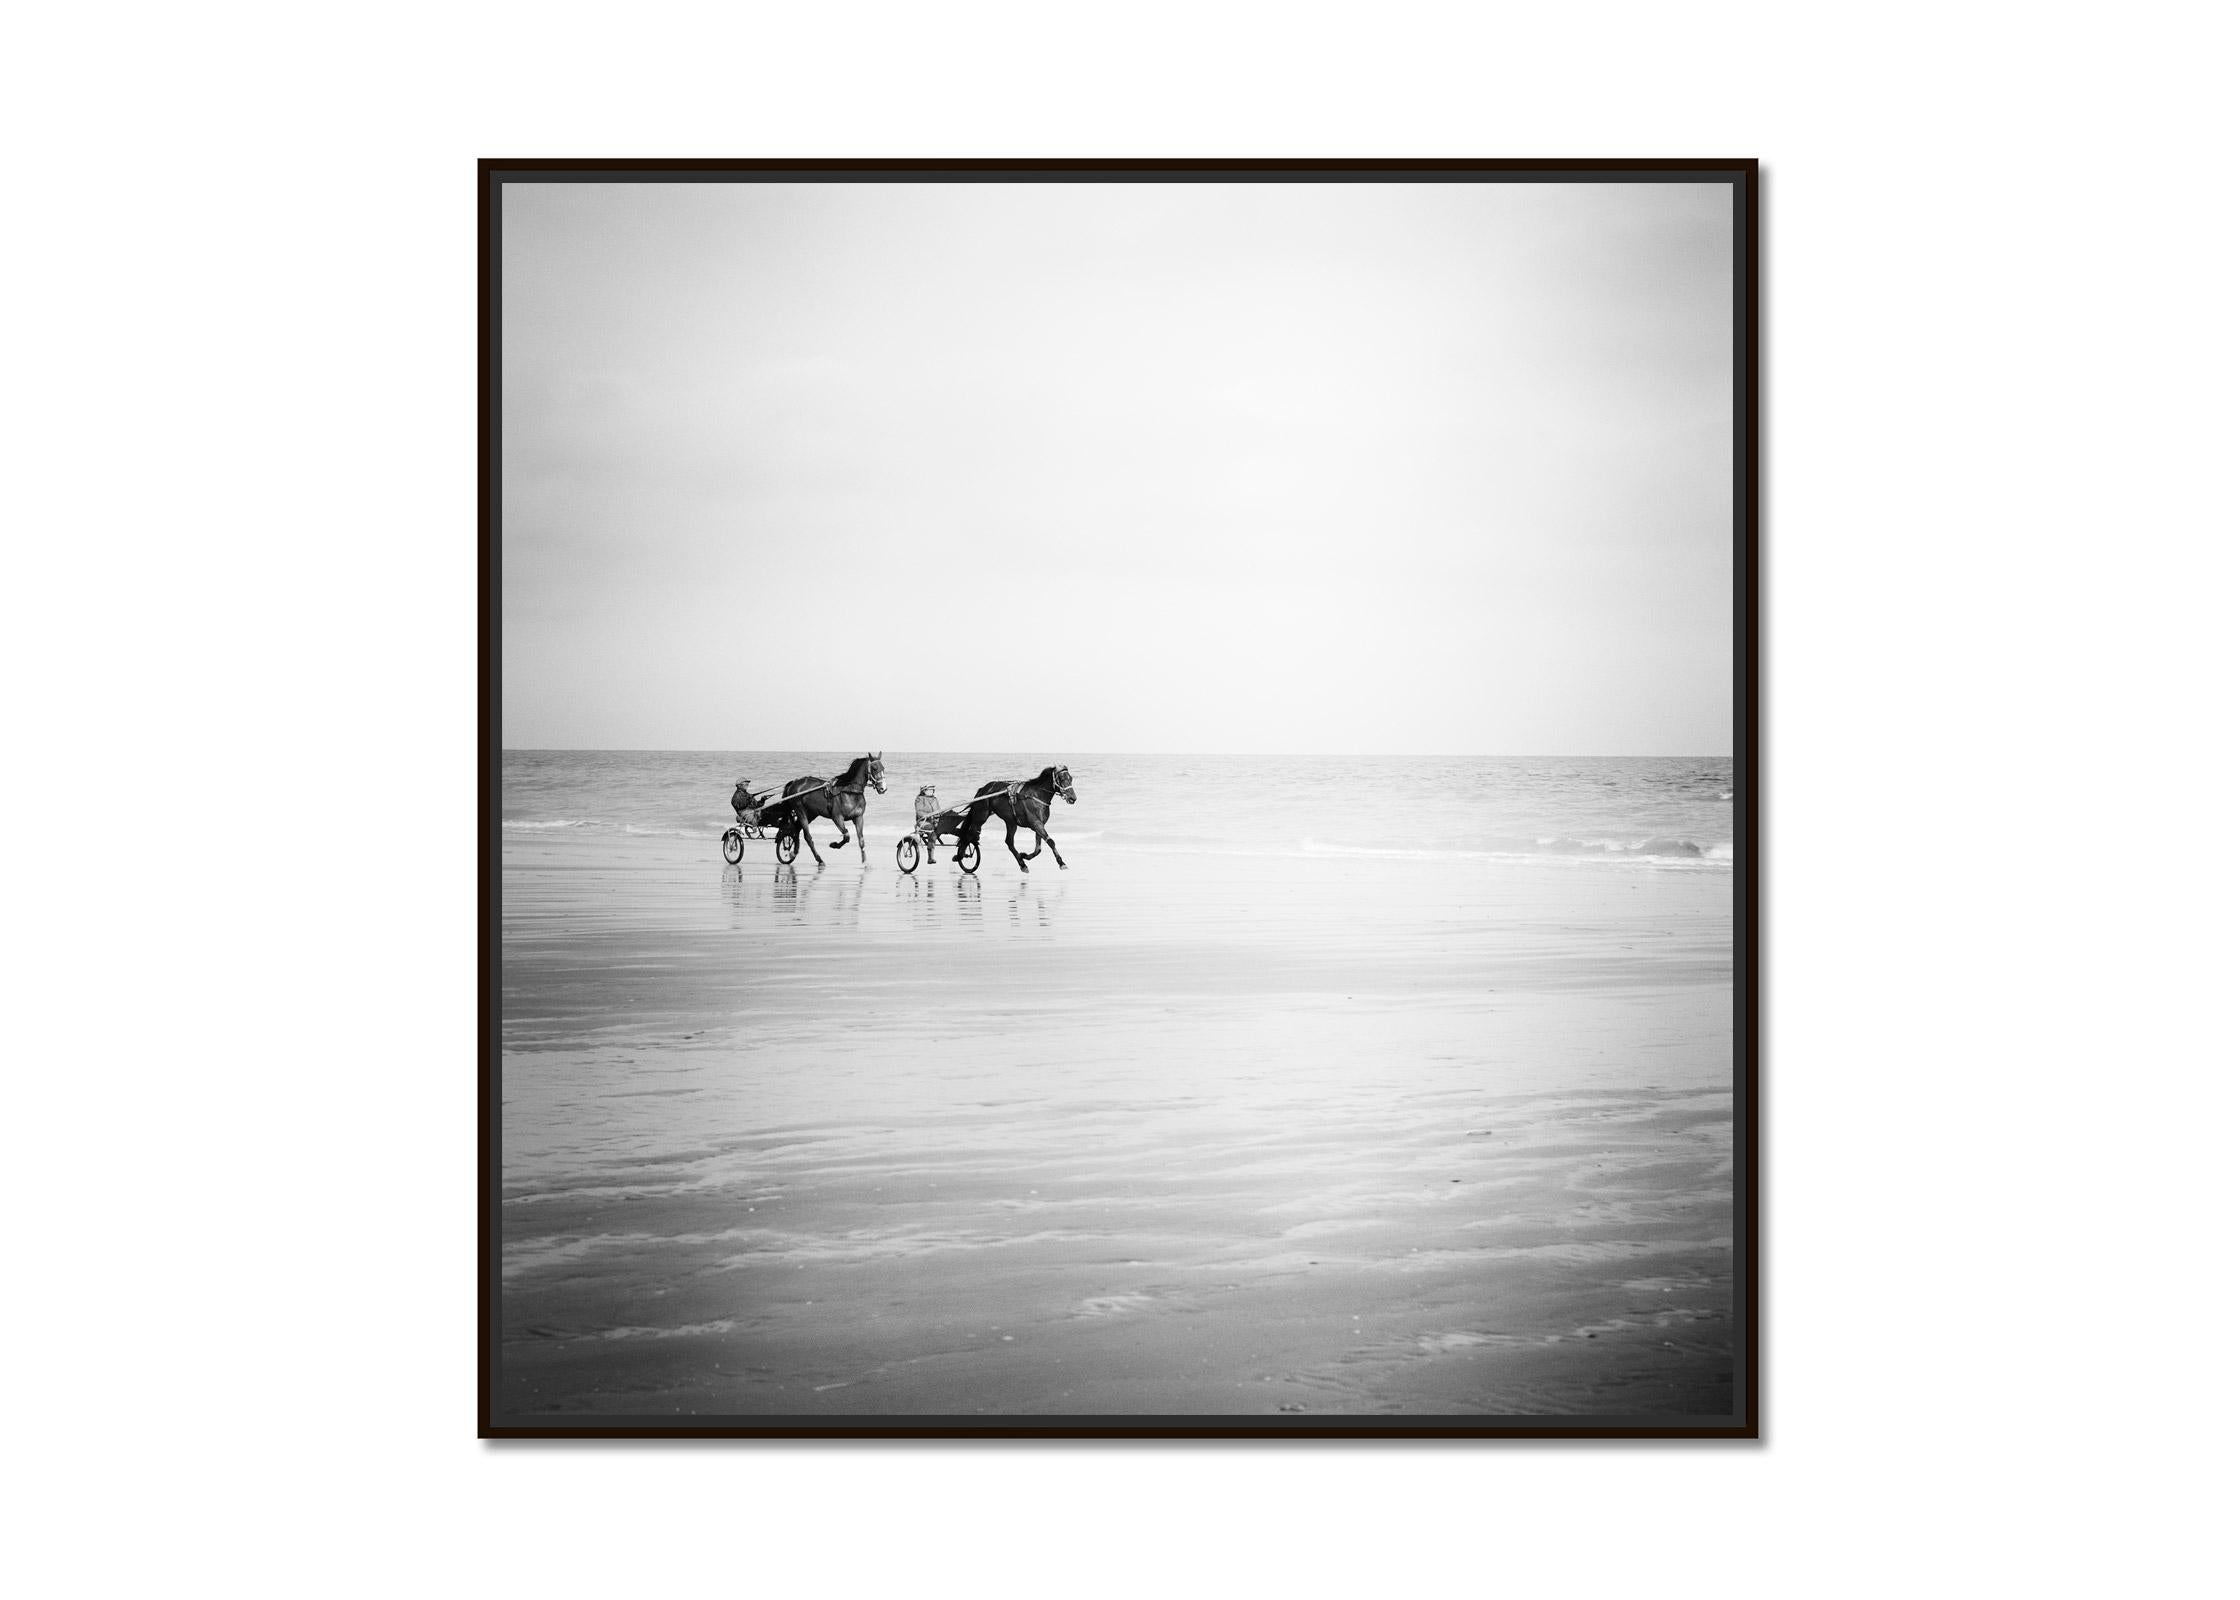 Harness Racing, horses on the beach, France, black white landscape photography - Photograph by Gerald Berghammer